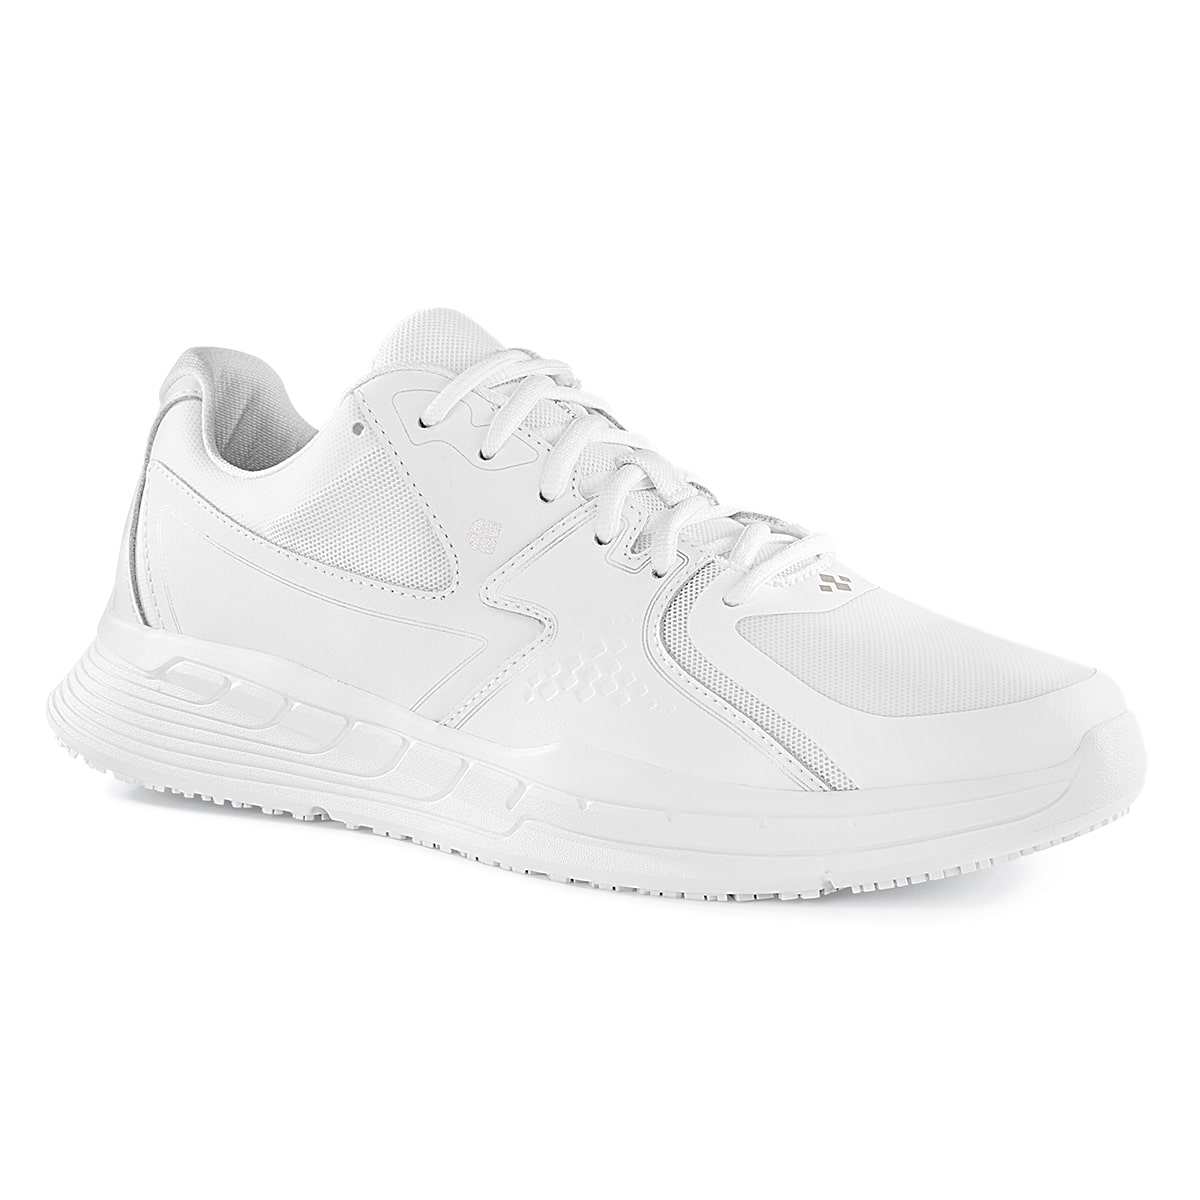 The Condor Men's White from Shoes for Crews is a slip-resistant shoe with laces, with additional padding and a removable cushioned insole, seen from the right profile.